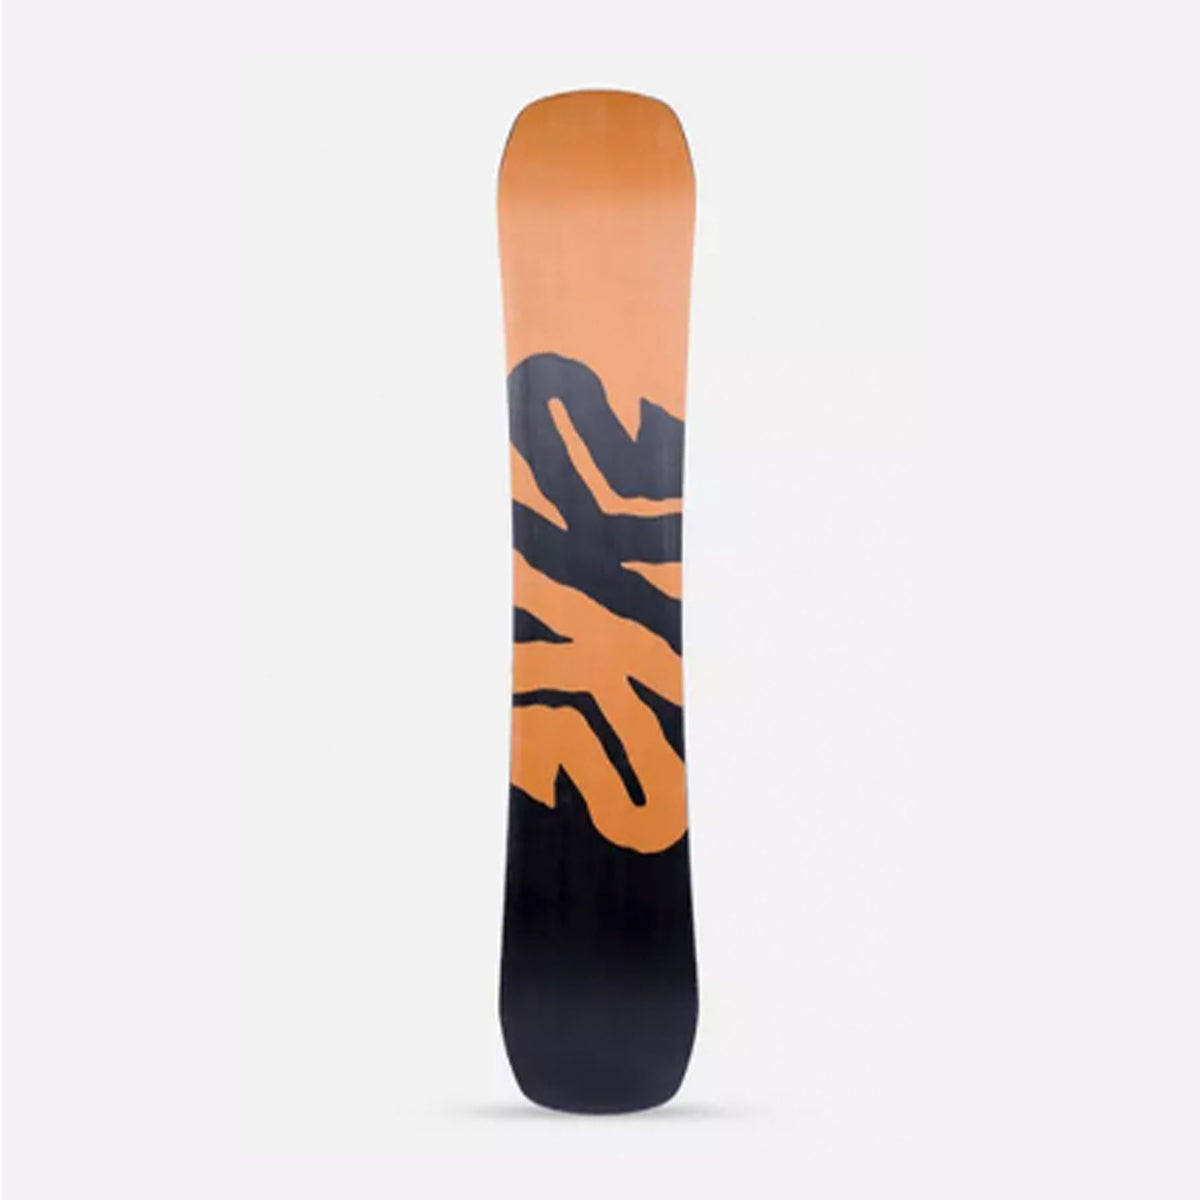 Image featuring the bottom side of the K2 Afterblack snowboard